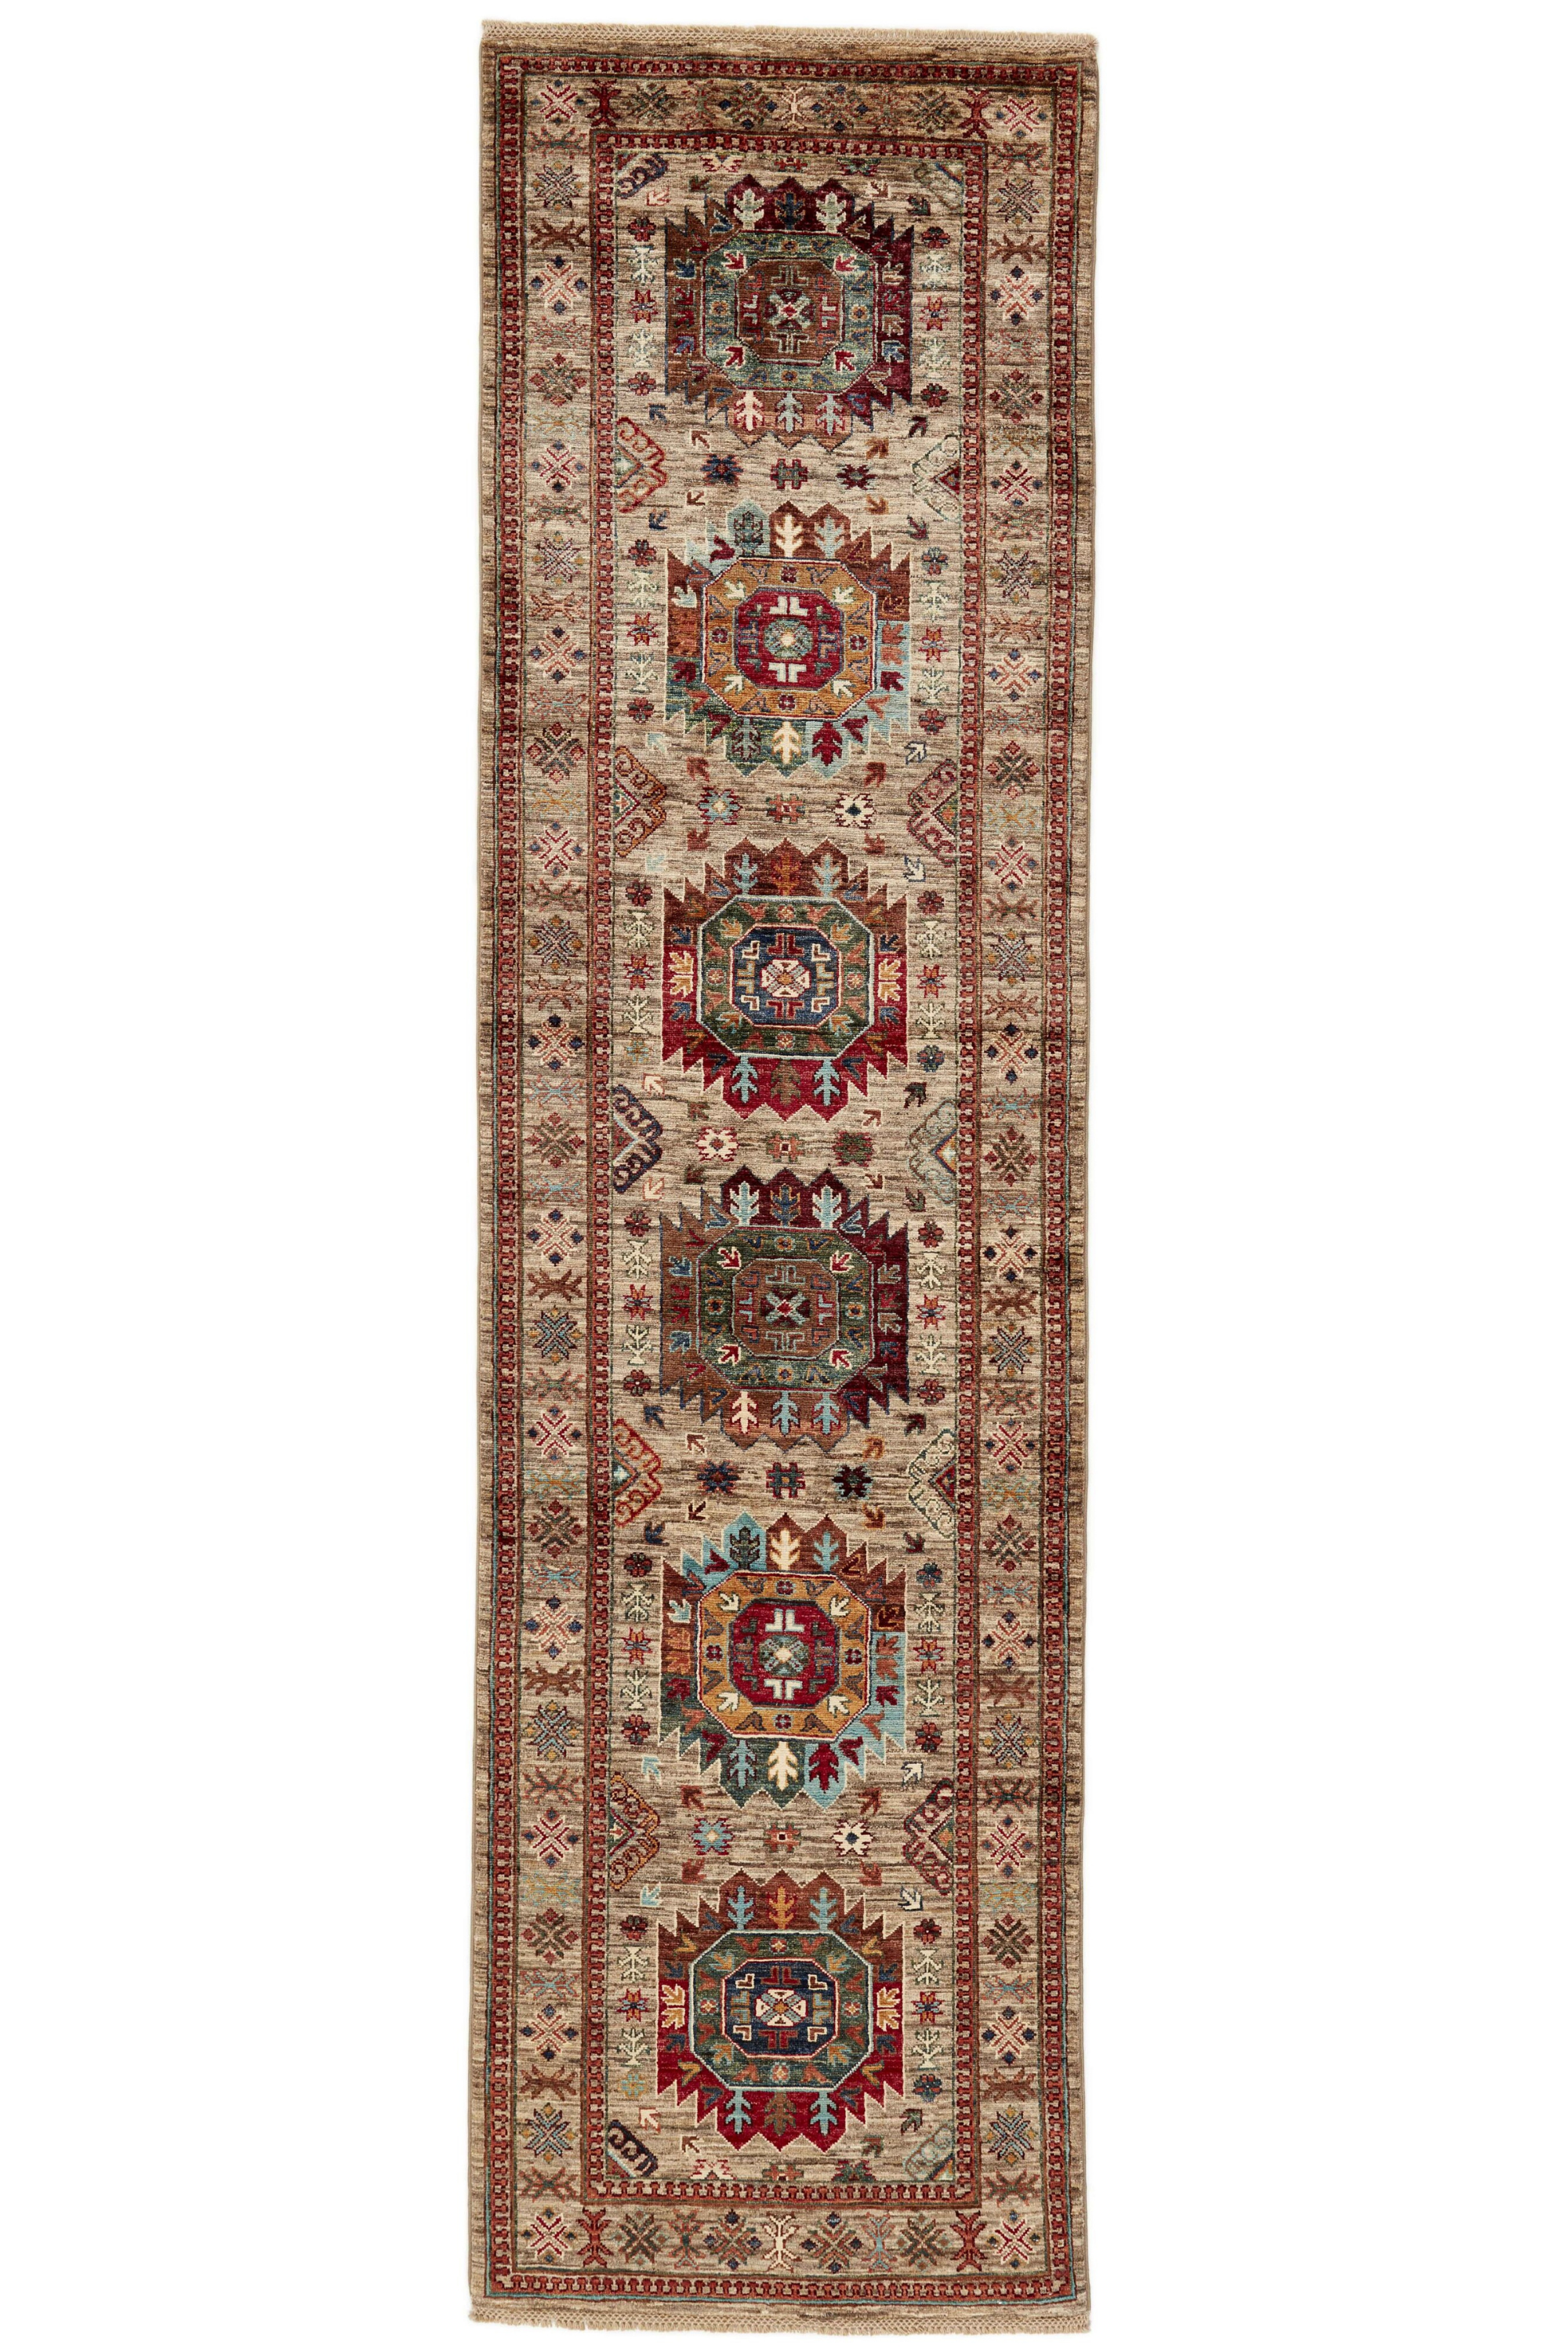 Beige oriental wool runner with a traditional bordered multicolour pattern